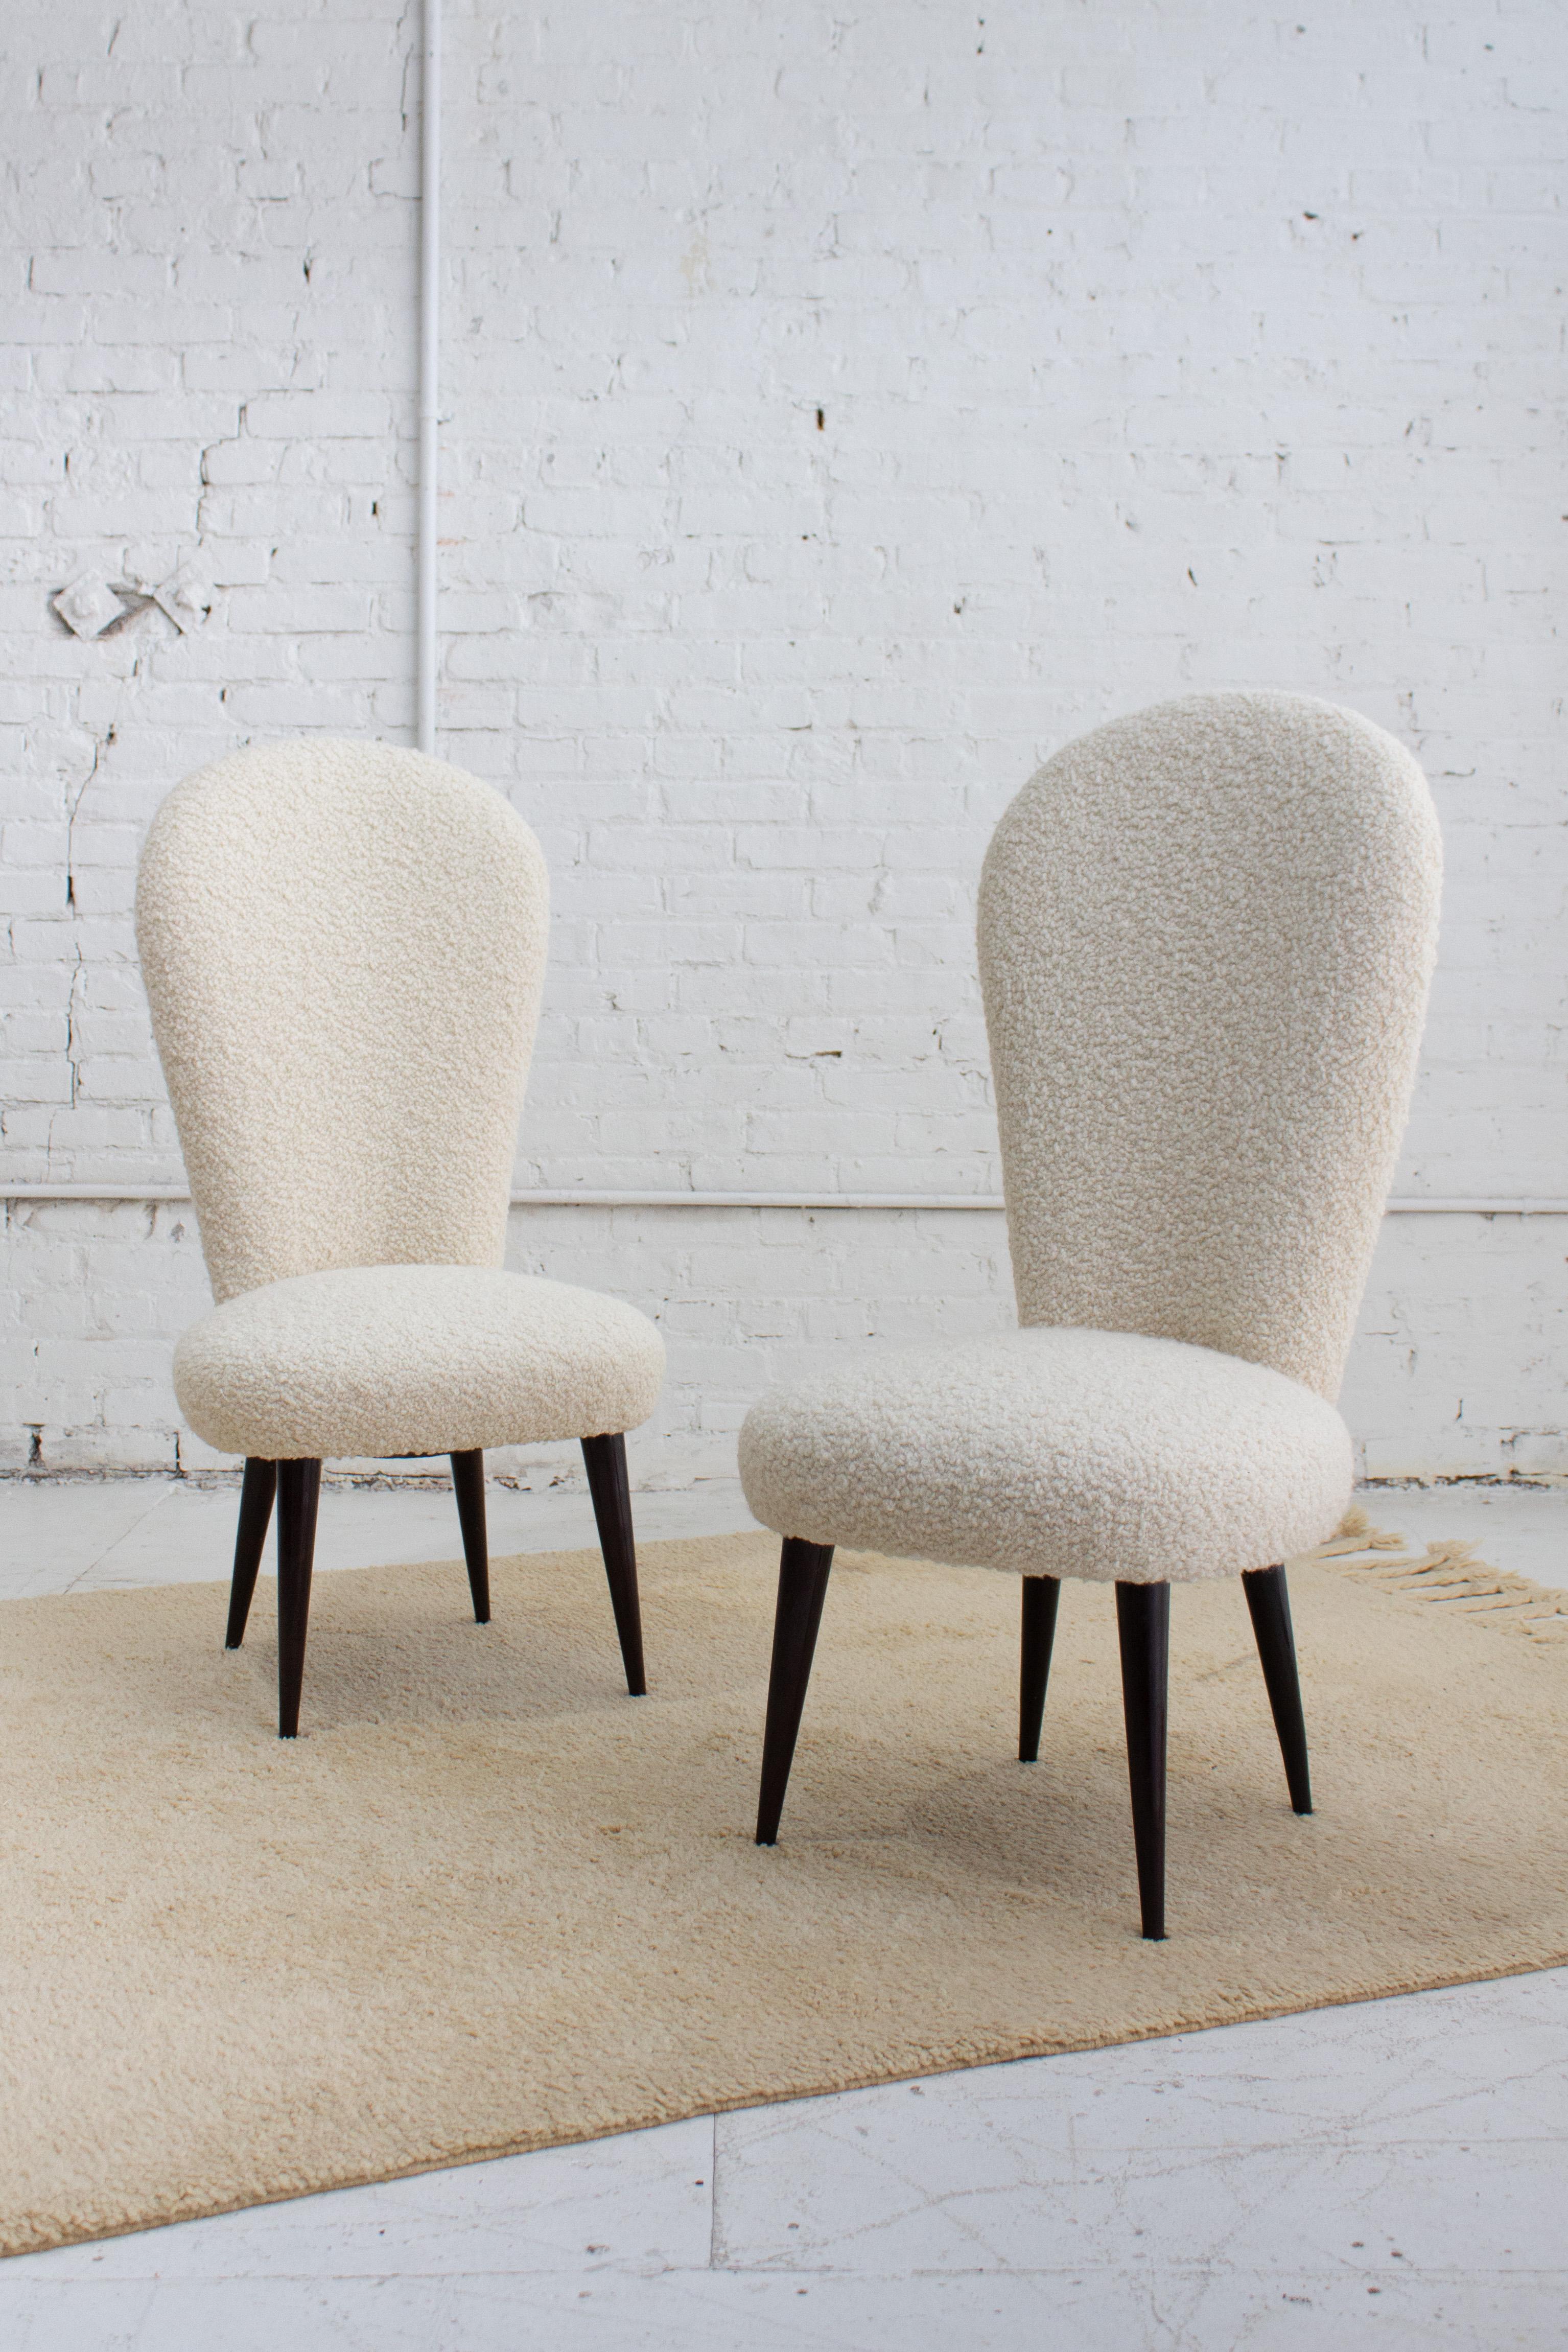 A pair of mid century Italian chairs newly reupholstered in a high quality wool bouclé. Curved high back silhouette with tapered dark wood legs. Petite in scale. Sourced in Northern, Italy.